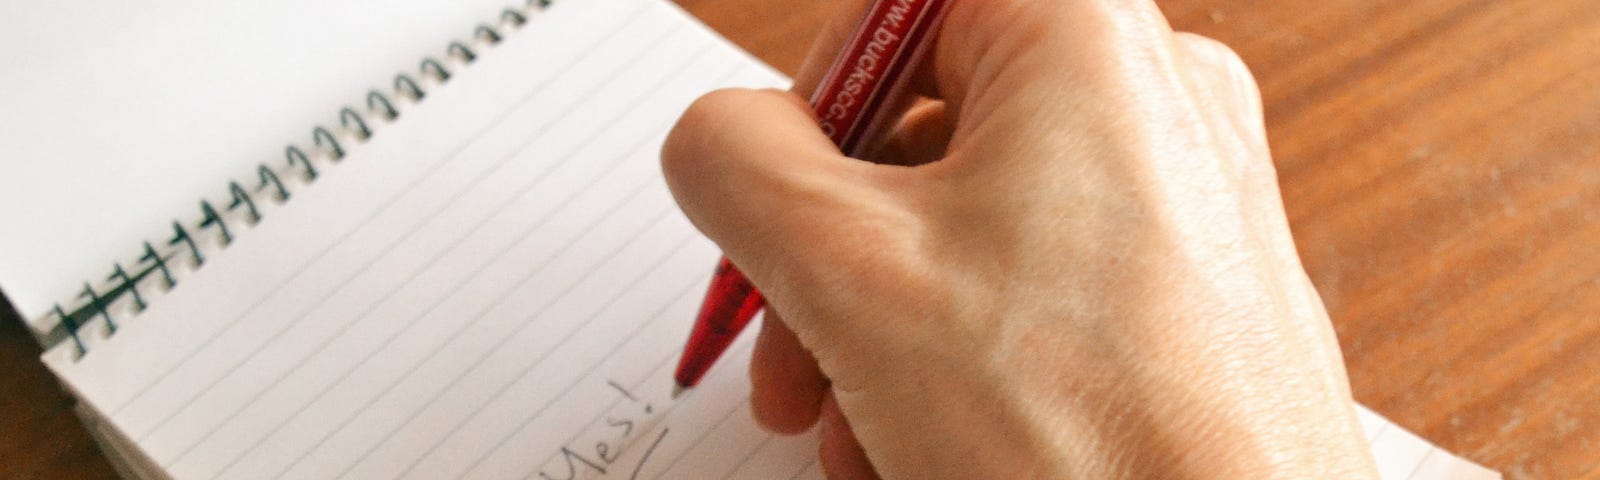 A hand scribbling on a notepad — image by author